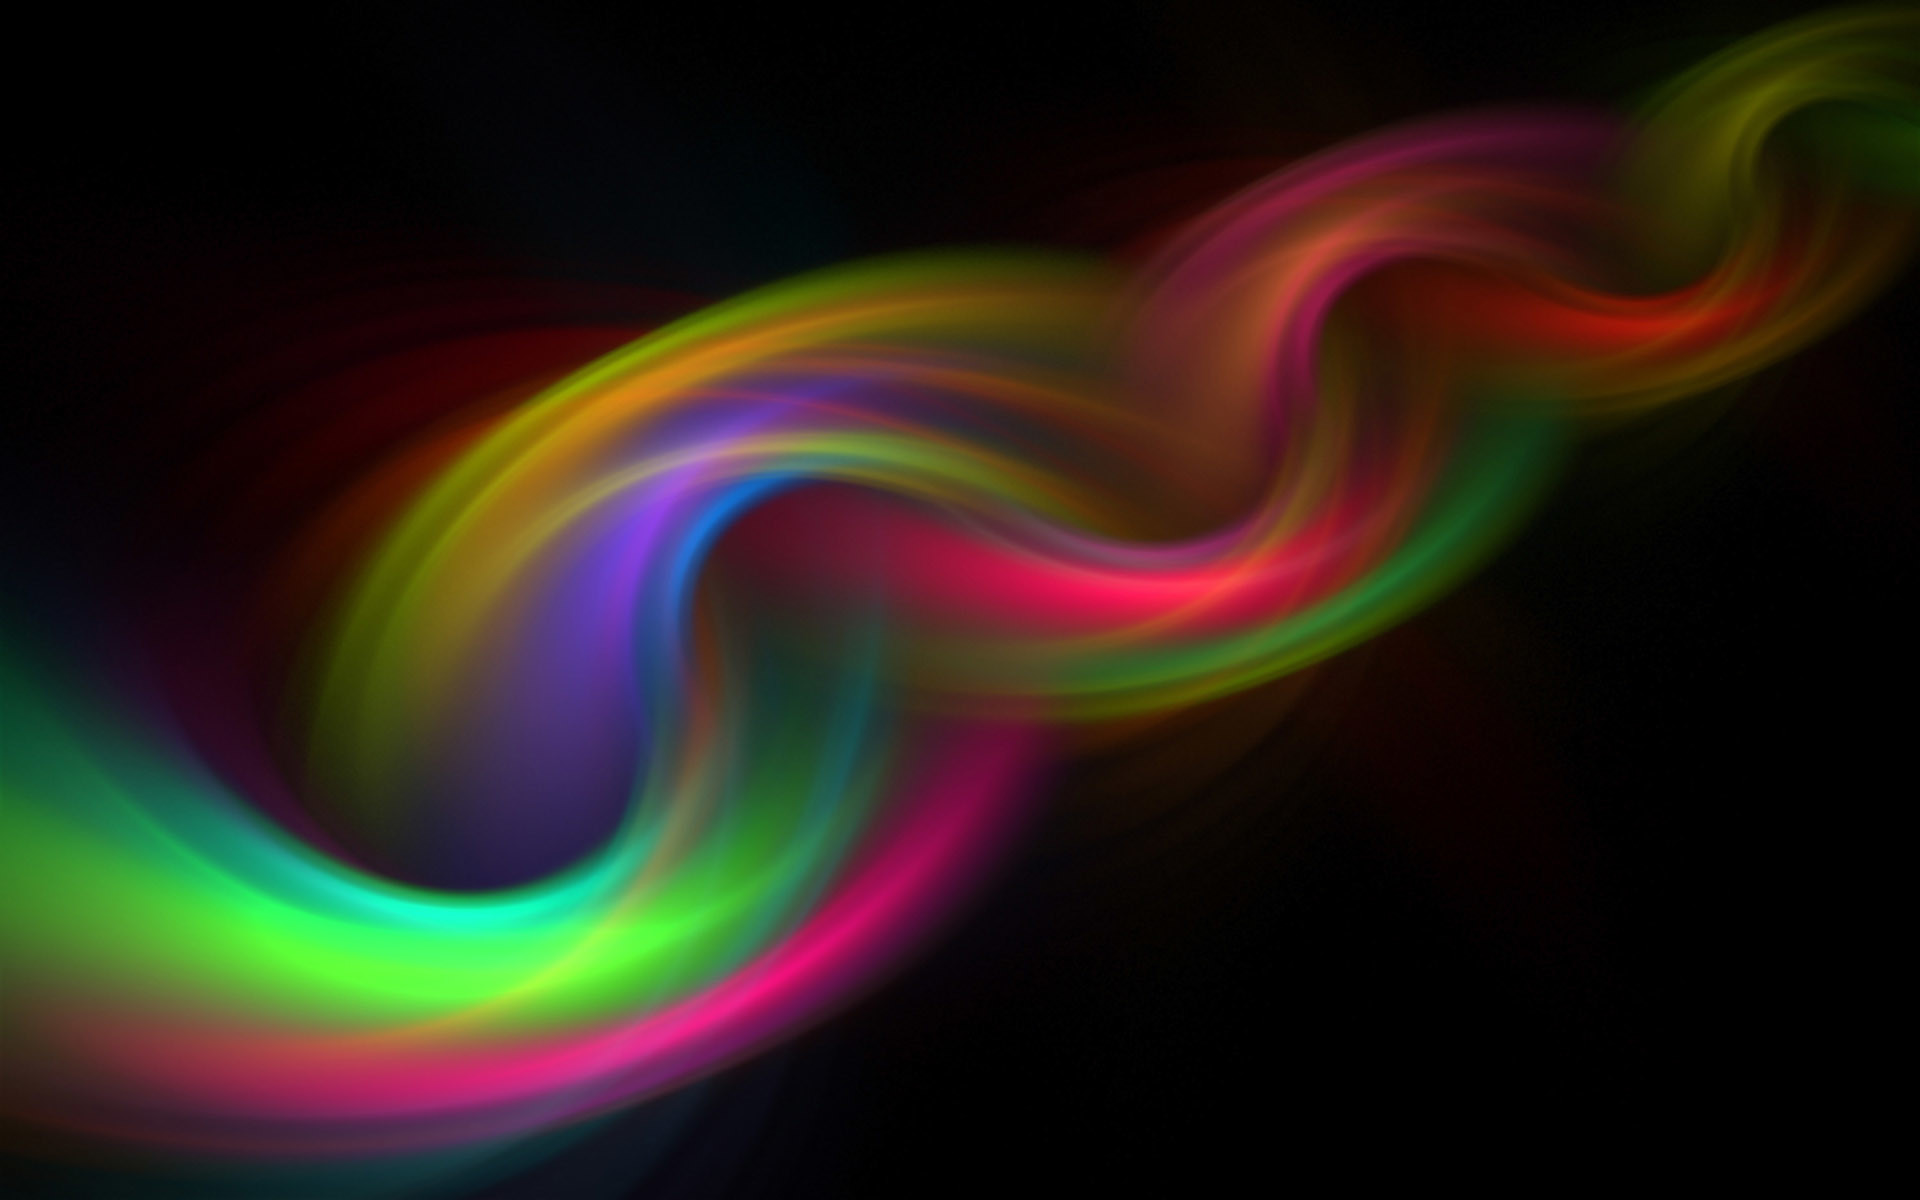 Abstract Backgrounds The Colours of Rainbow – Rainbow Colors Abstract Backgrounds 22